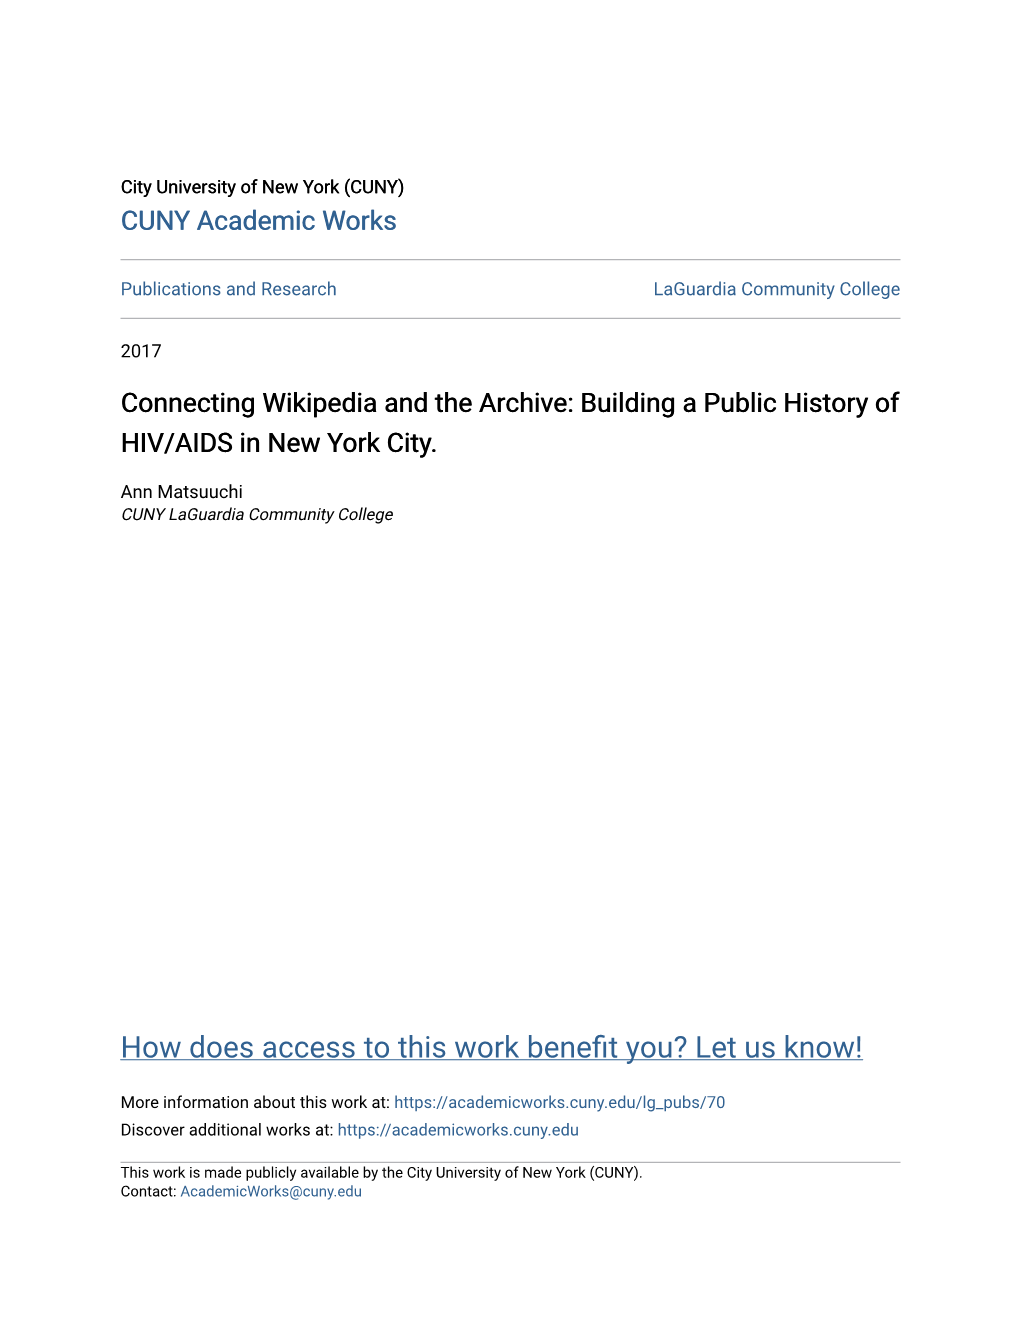 Connecting Wikipedia and the Archive: Building a Public History of HIV/AIDS in New York City